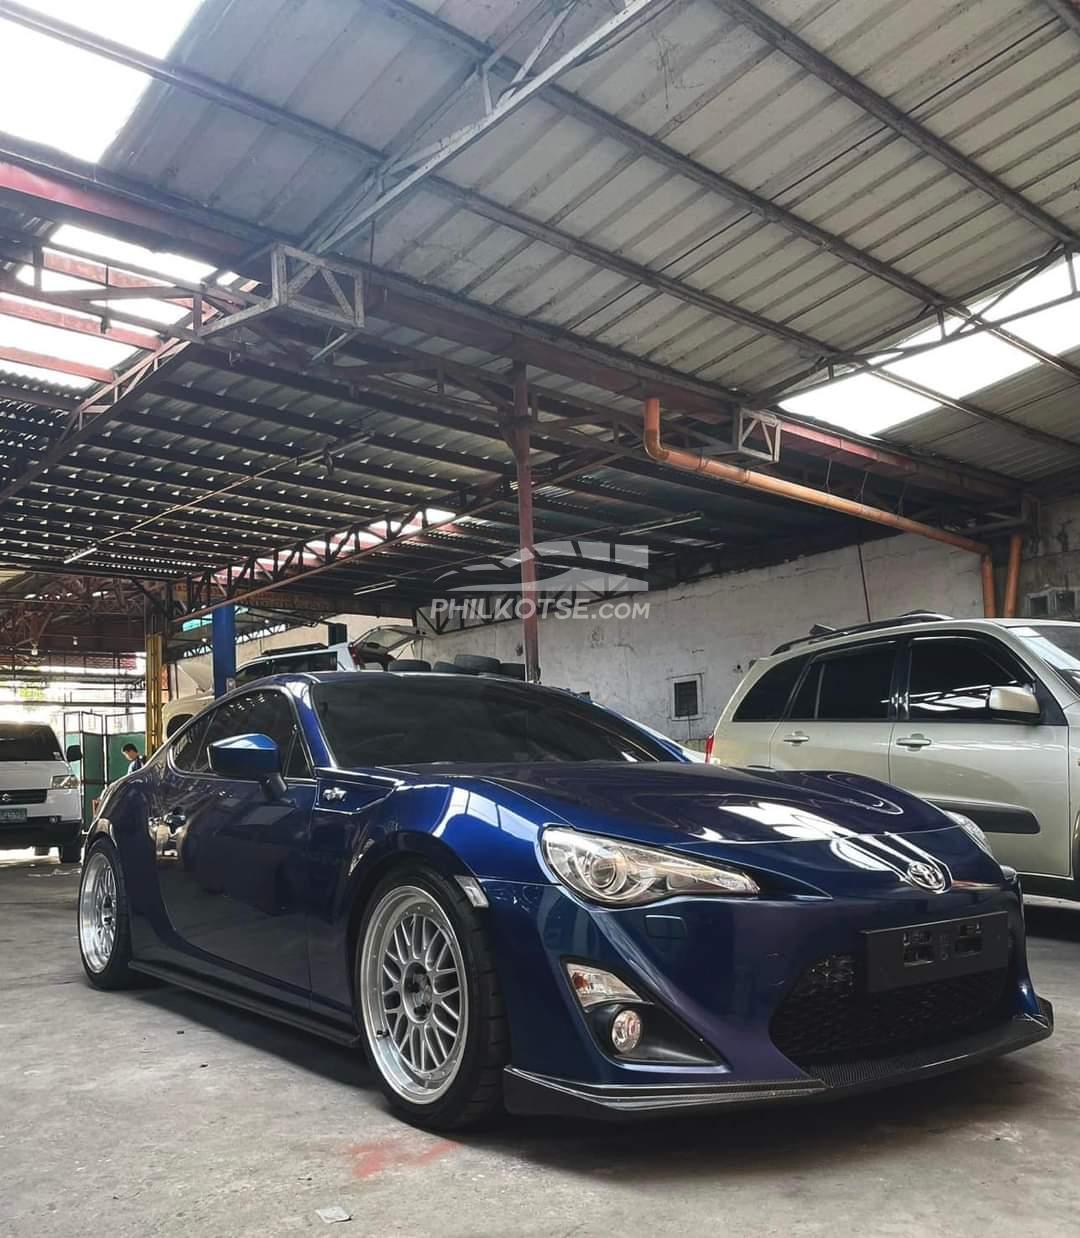 Buy Used Toyota 86 2013 for sale only ₱1280000 ID819897